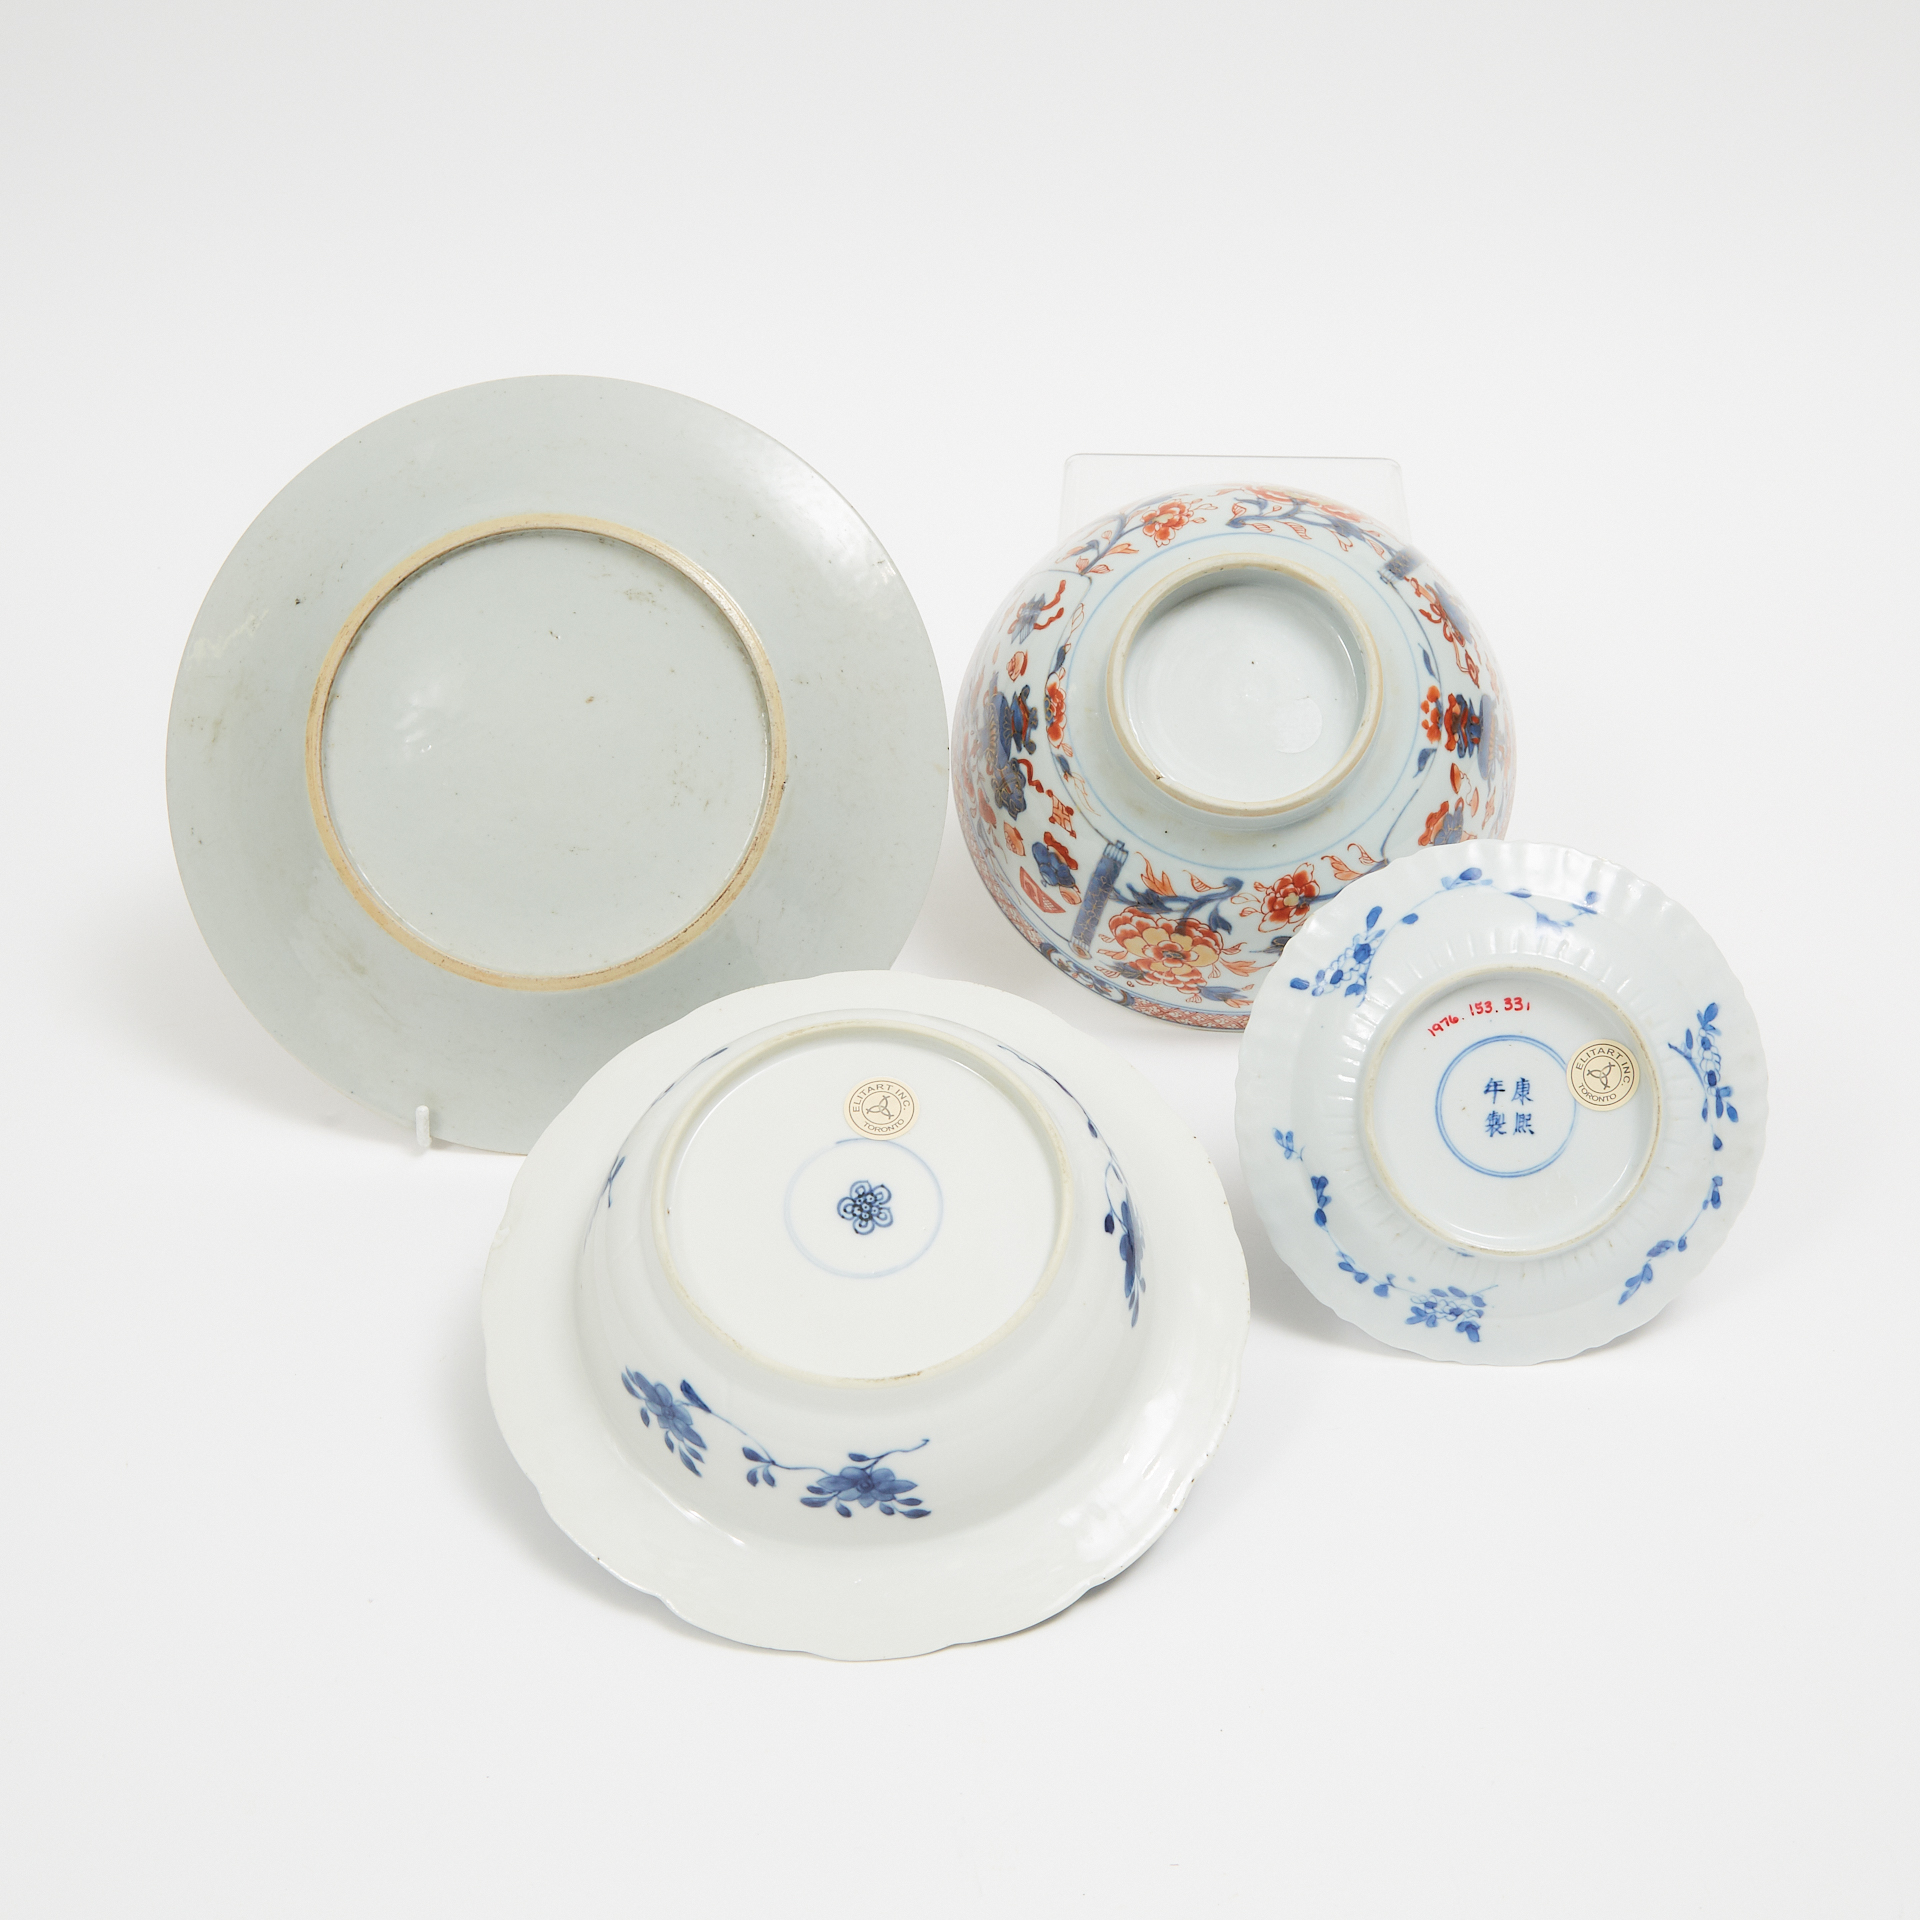 A Group of Four Chinese Export Porcelain Wares, Qing Dynasty